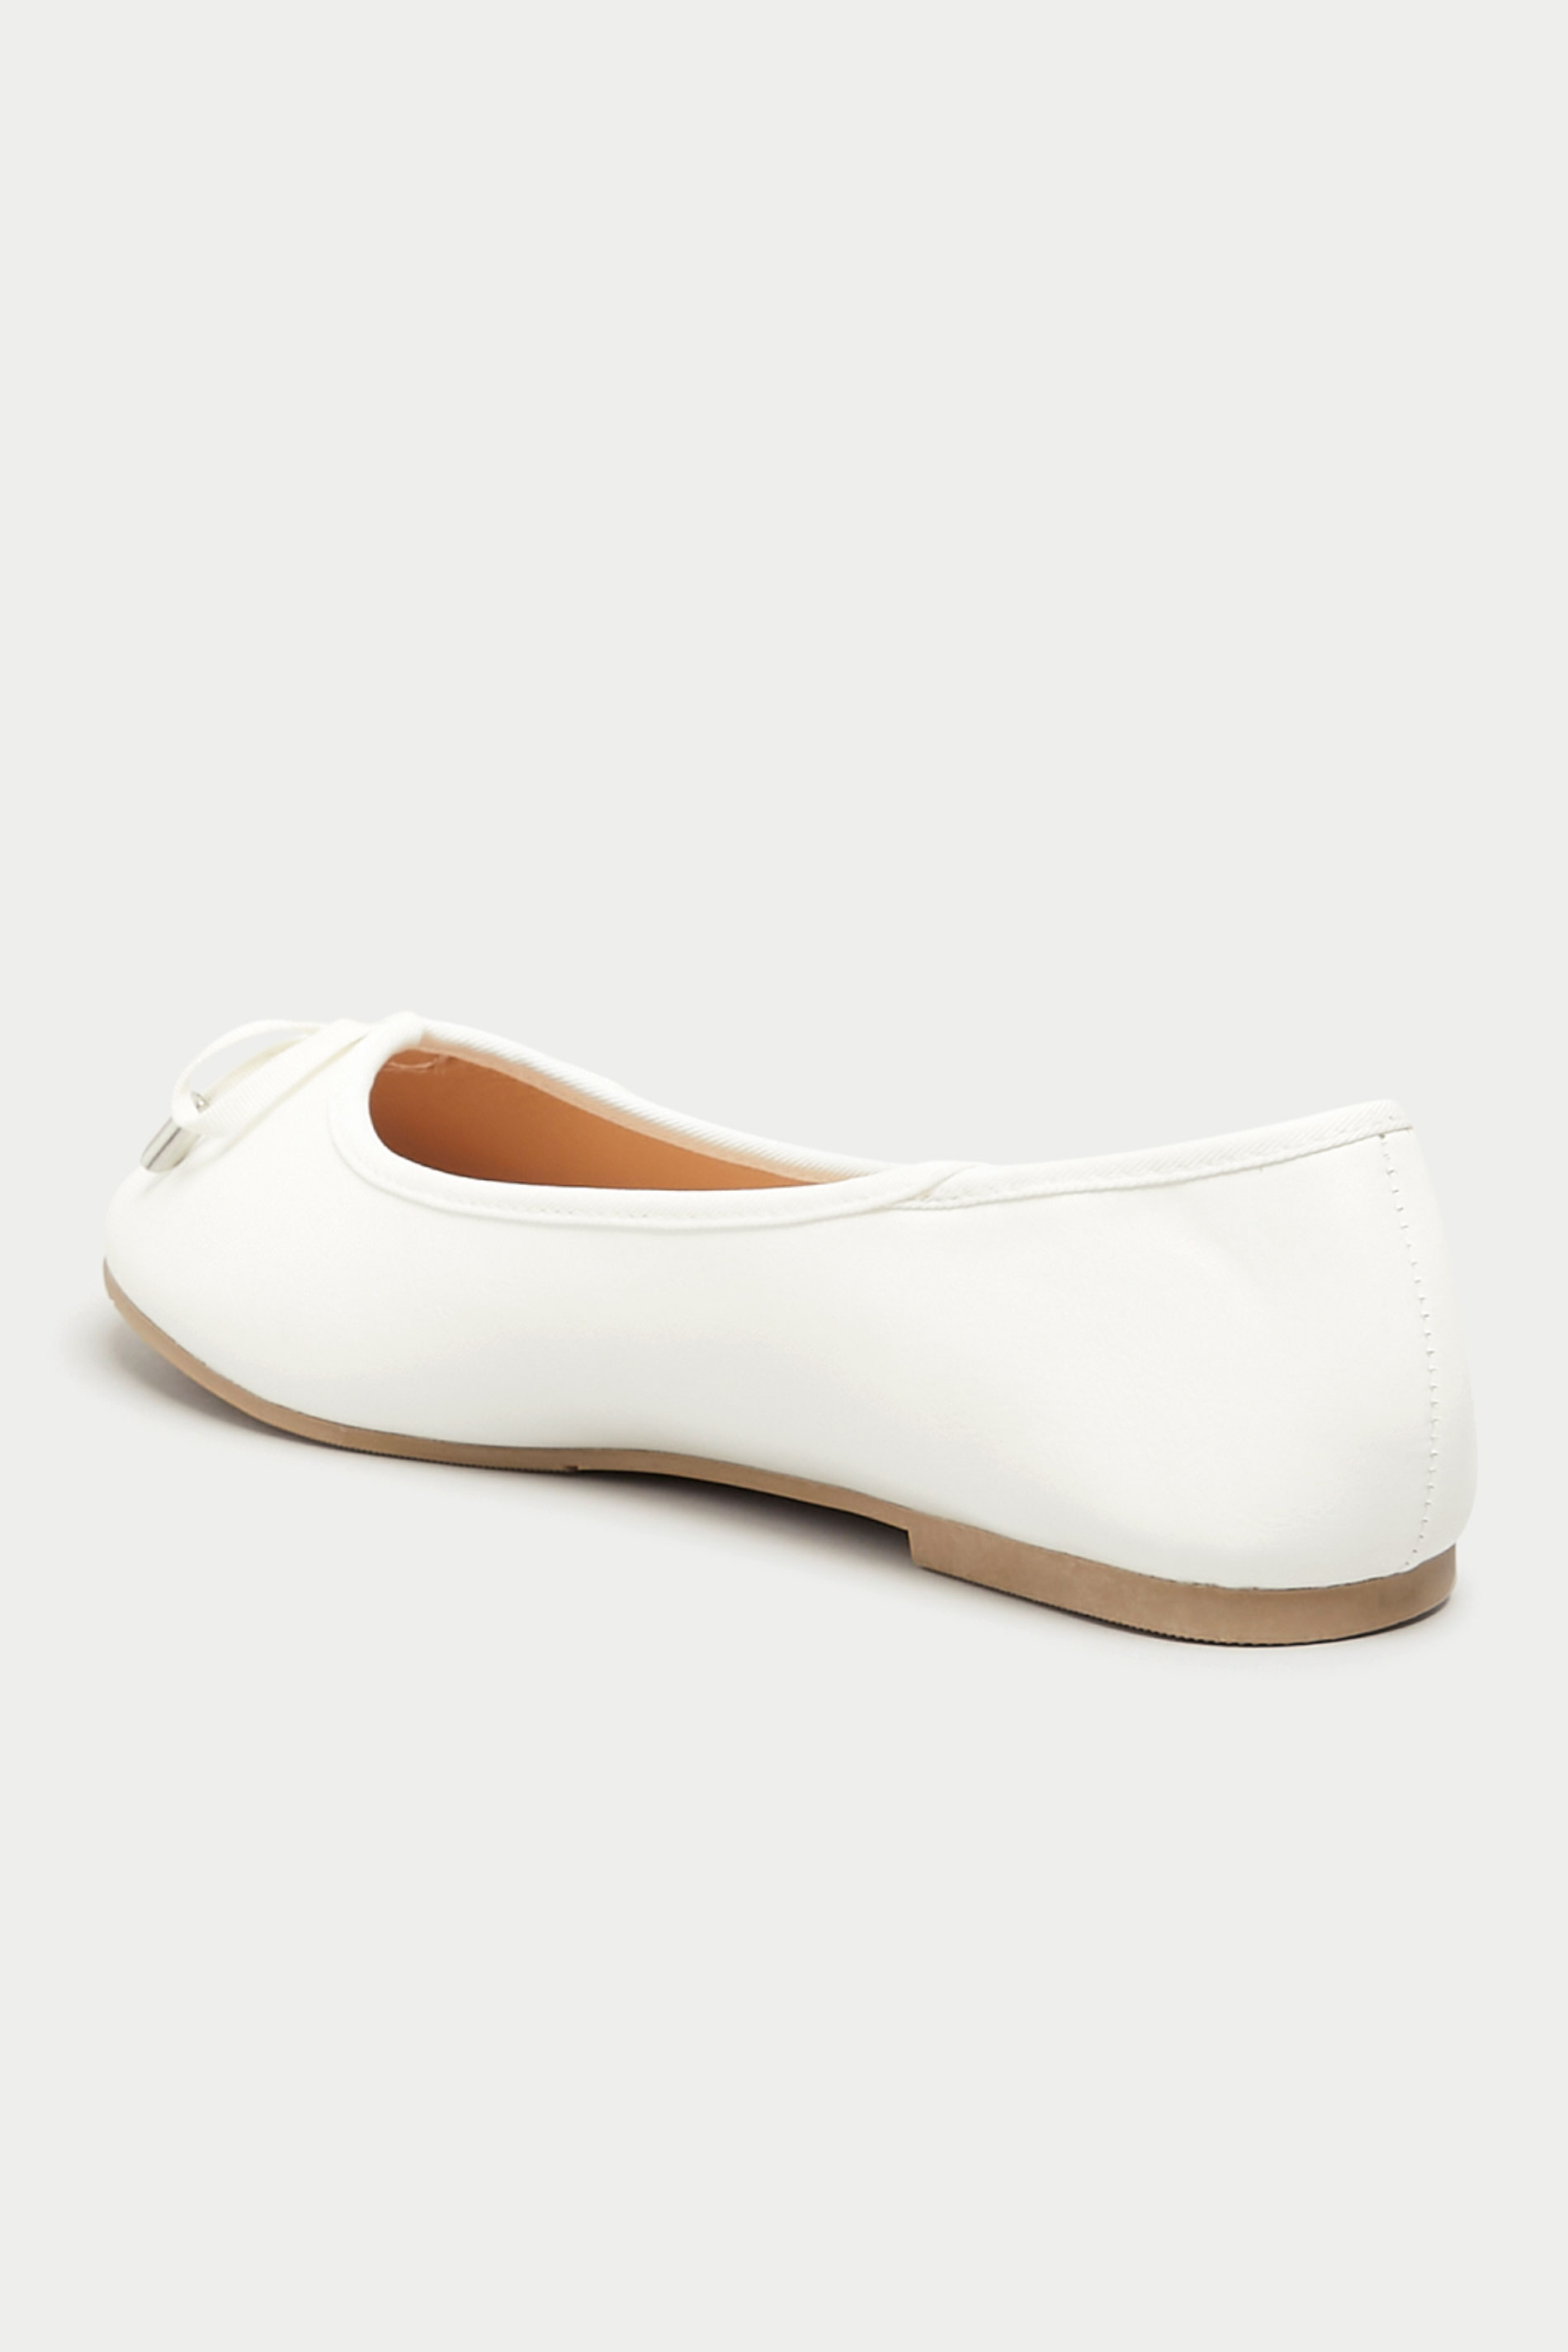 White Ballerina Pumps In Extra Wide Fit | Long Tall Sally